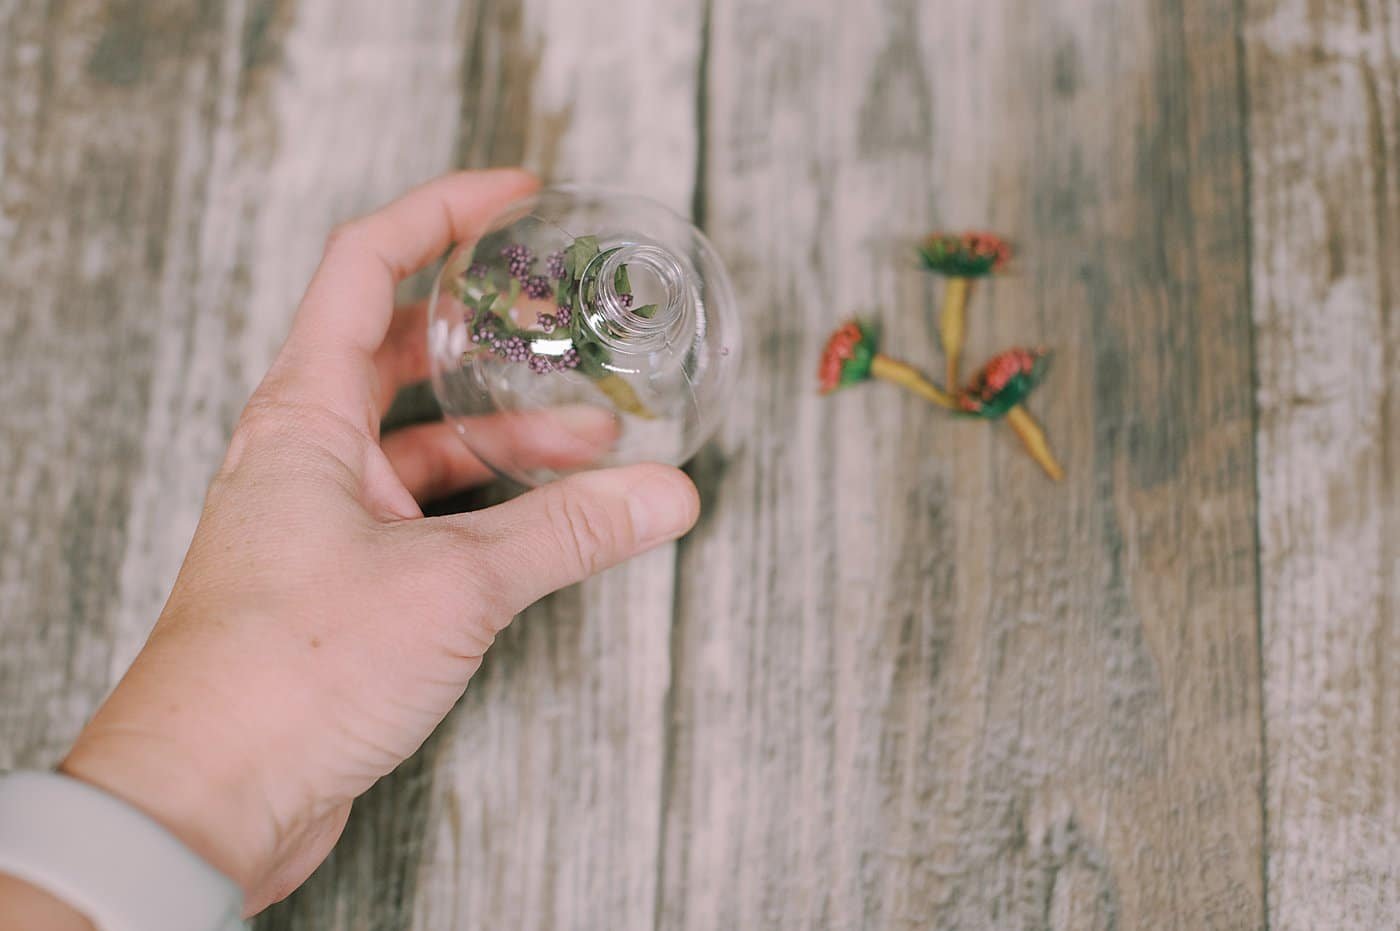 Put fake flowers into the glass or plastic christmas ball ornament.